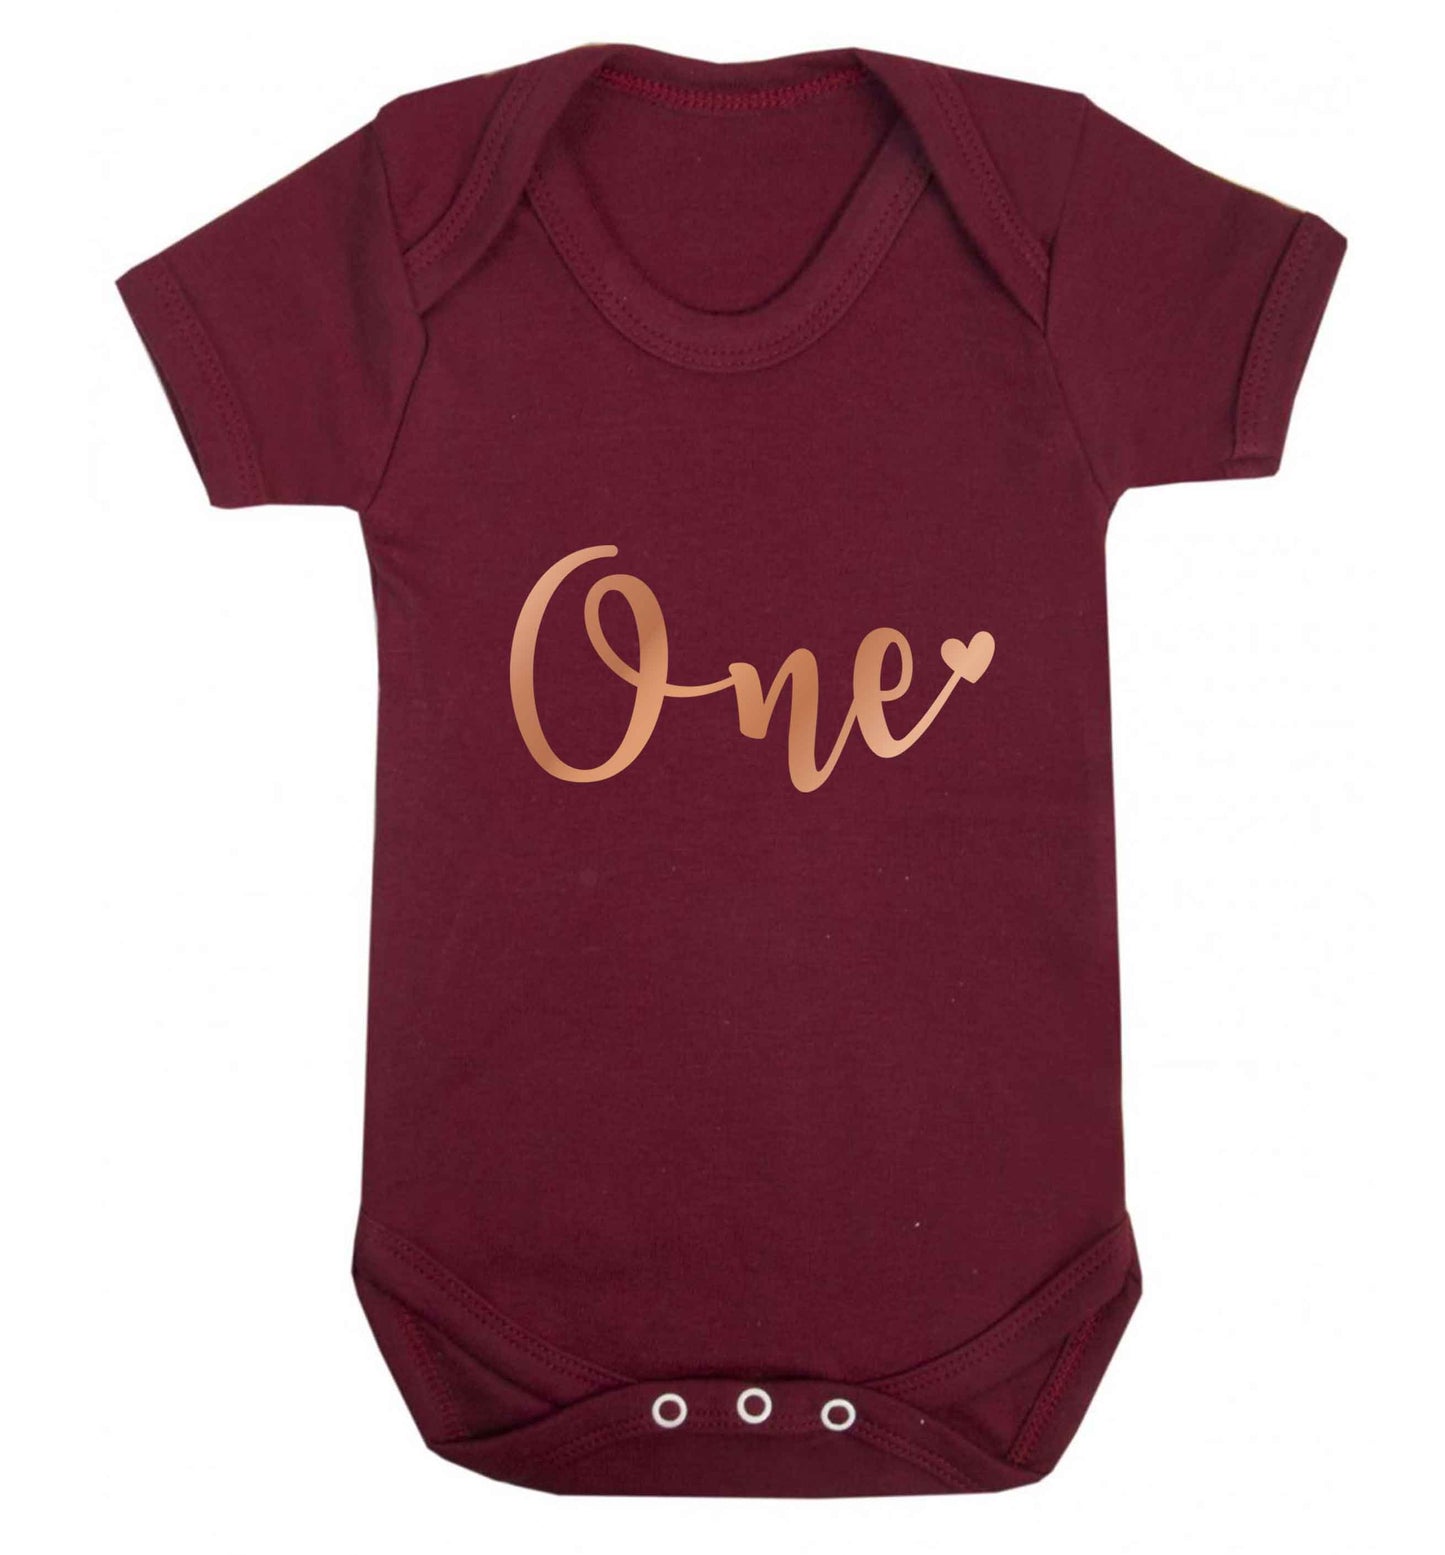 Rose Gold One baby vest maroon 18-24 months